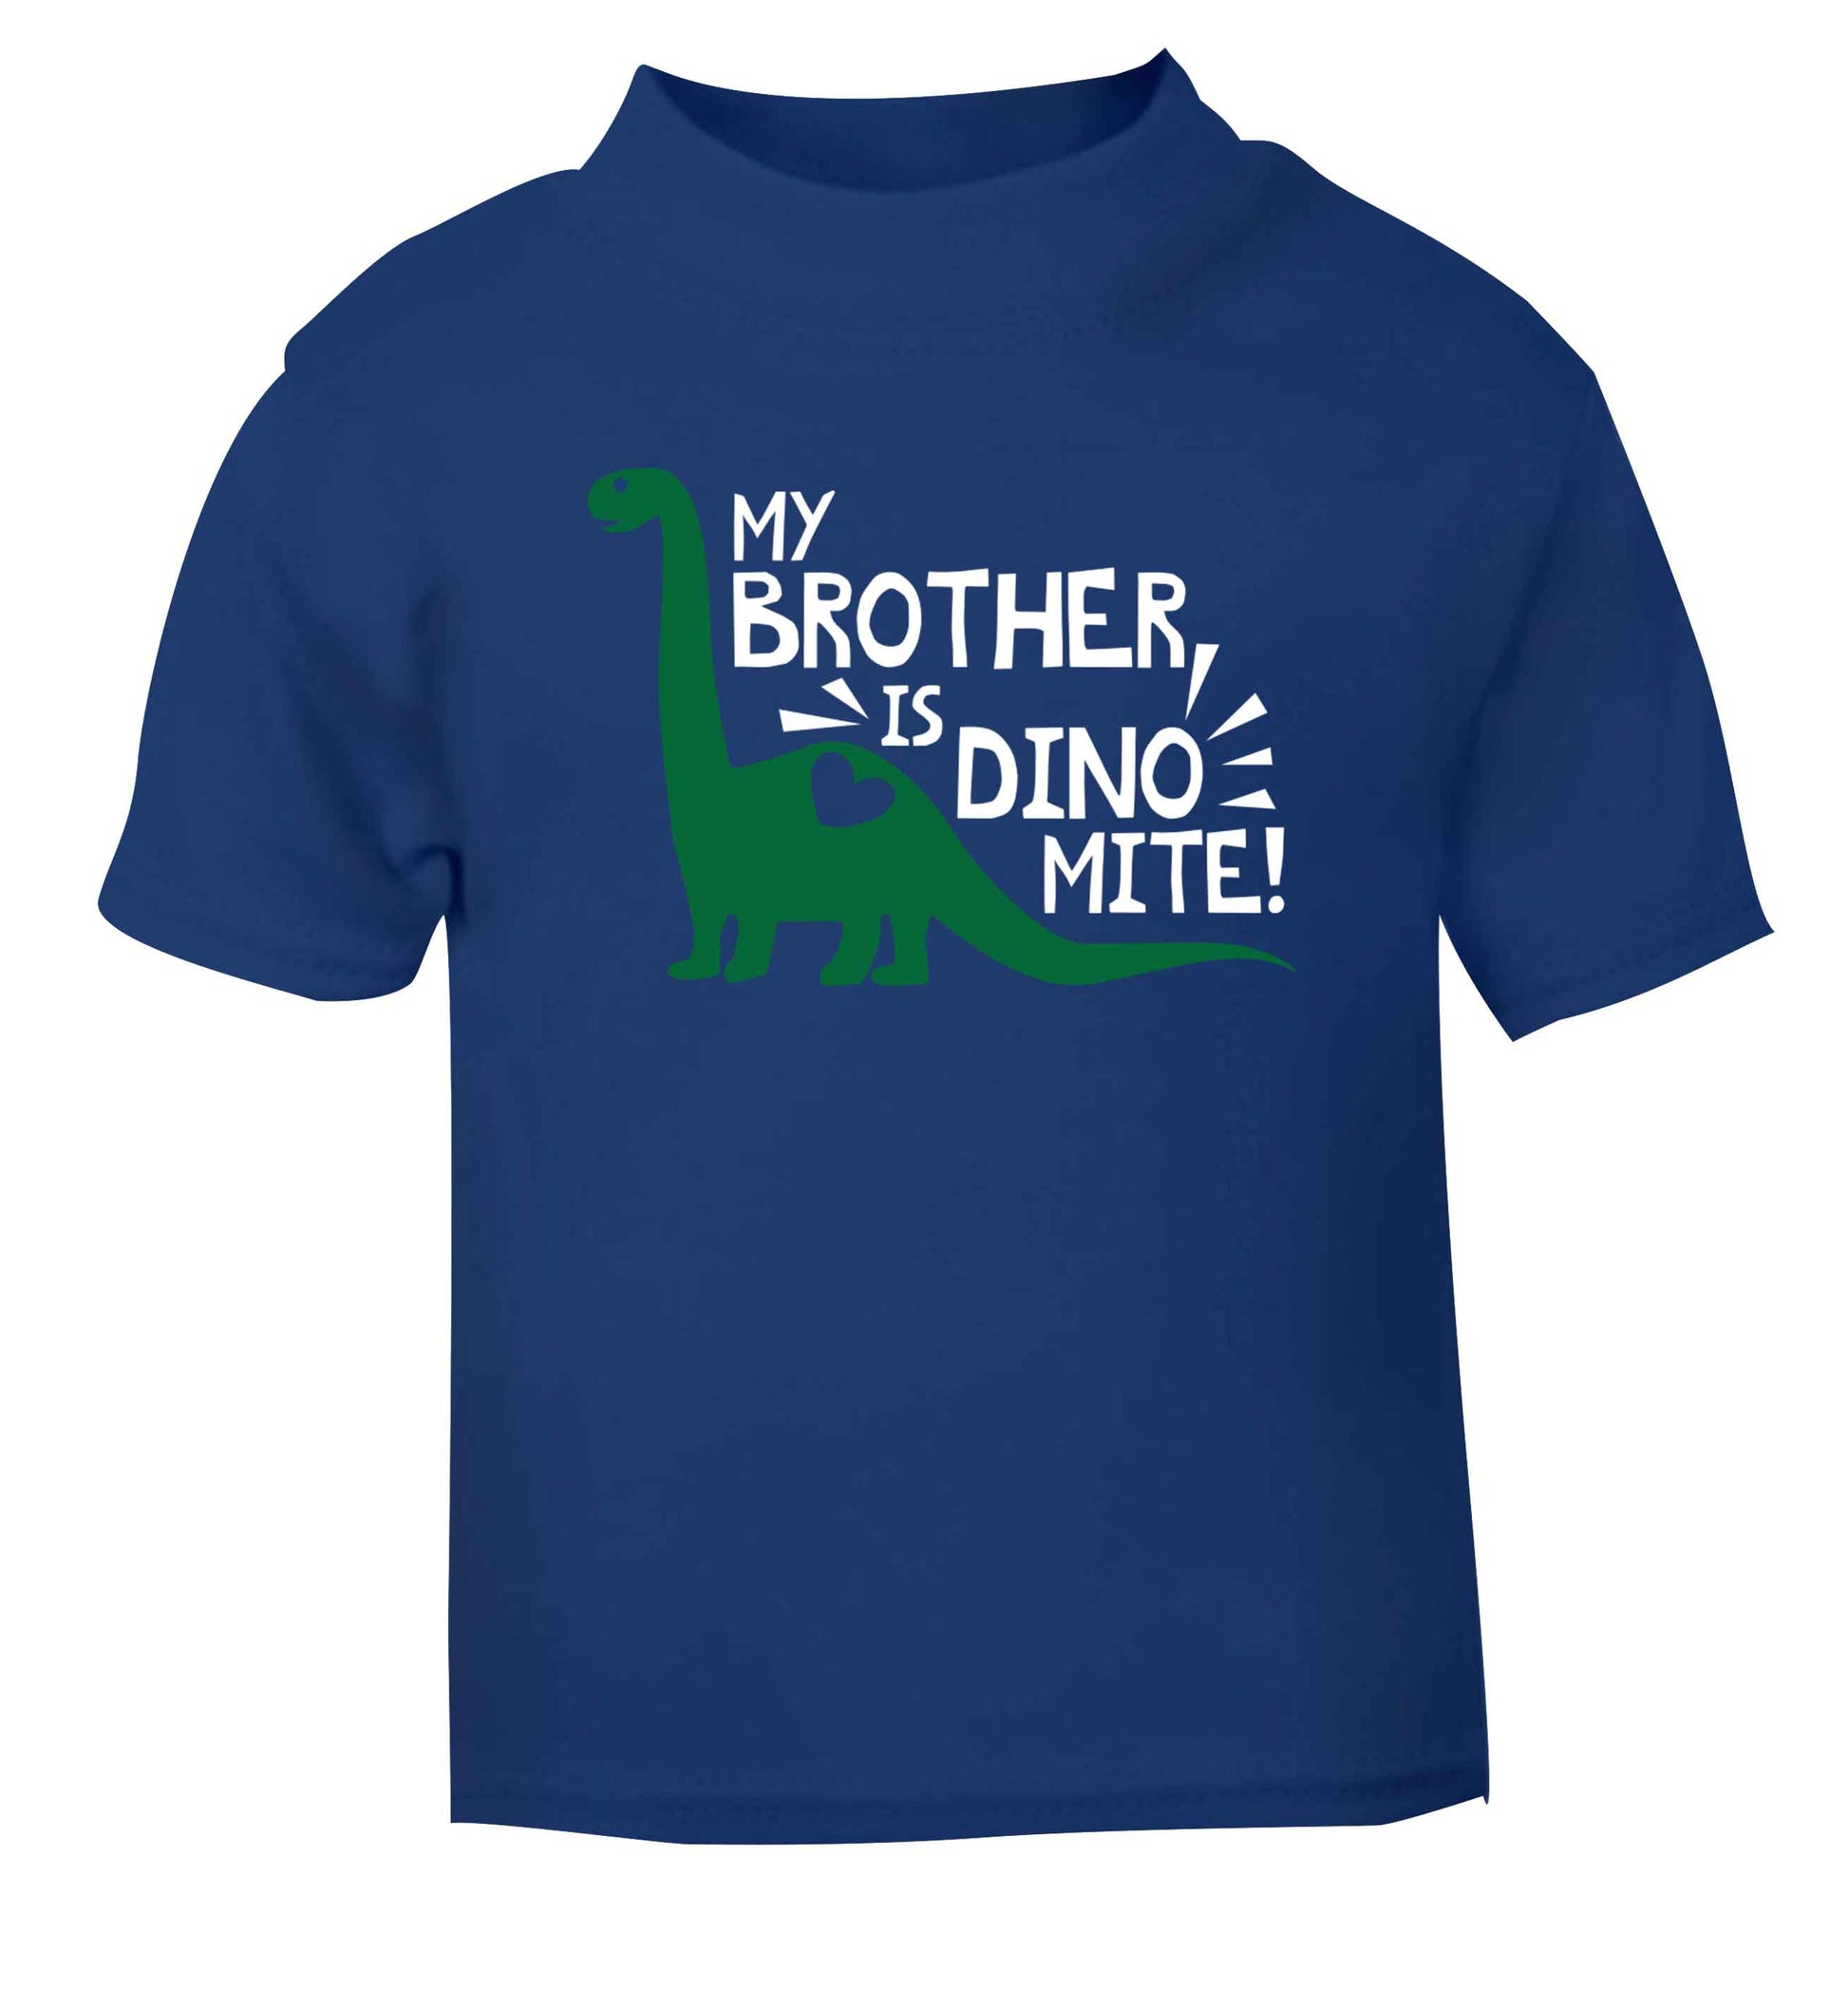 My brother is dinomite! blue Baby Toddler Tshirt 2 Years